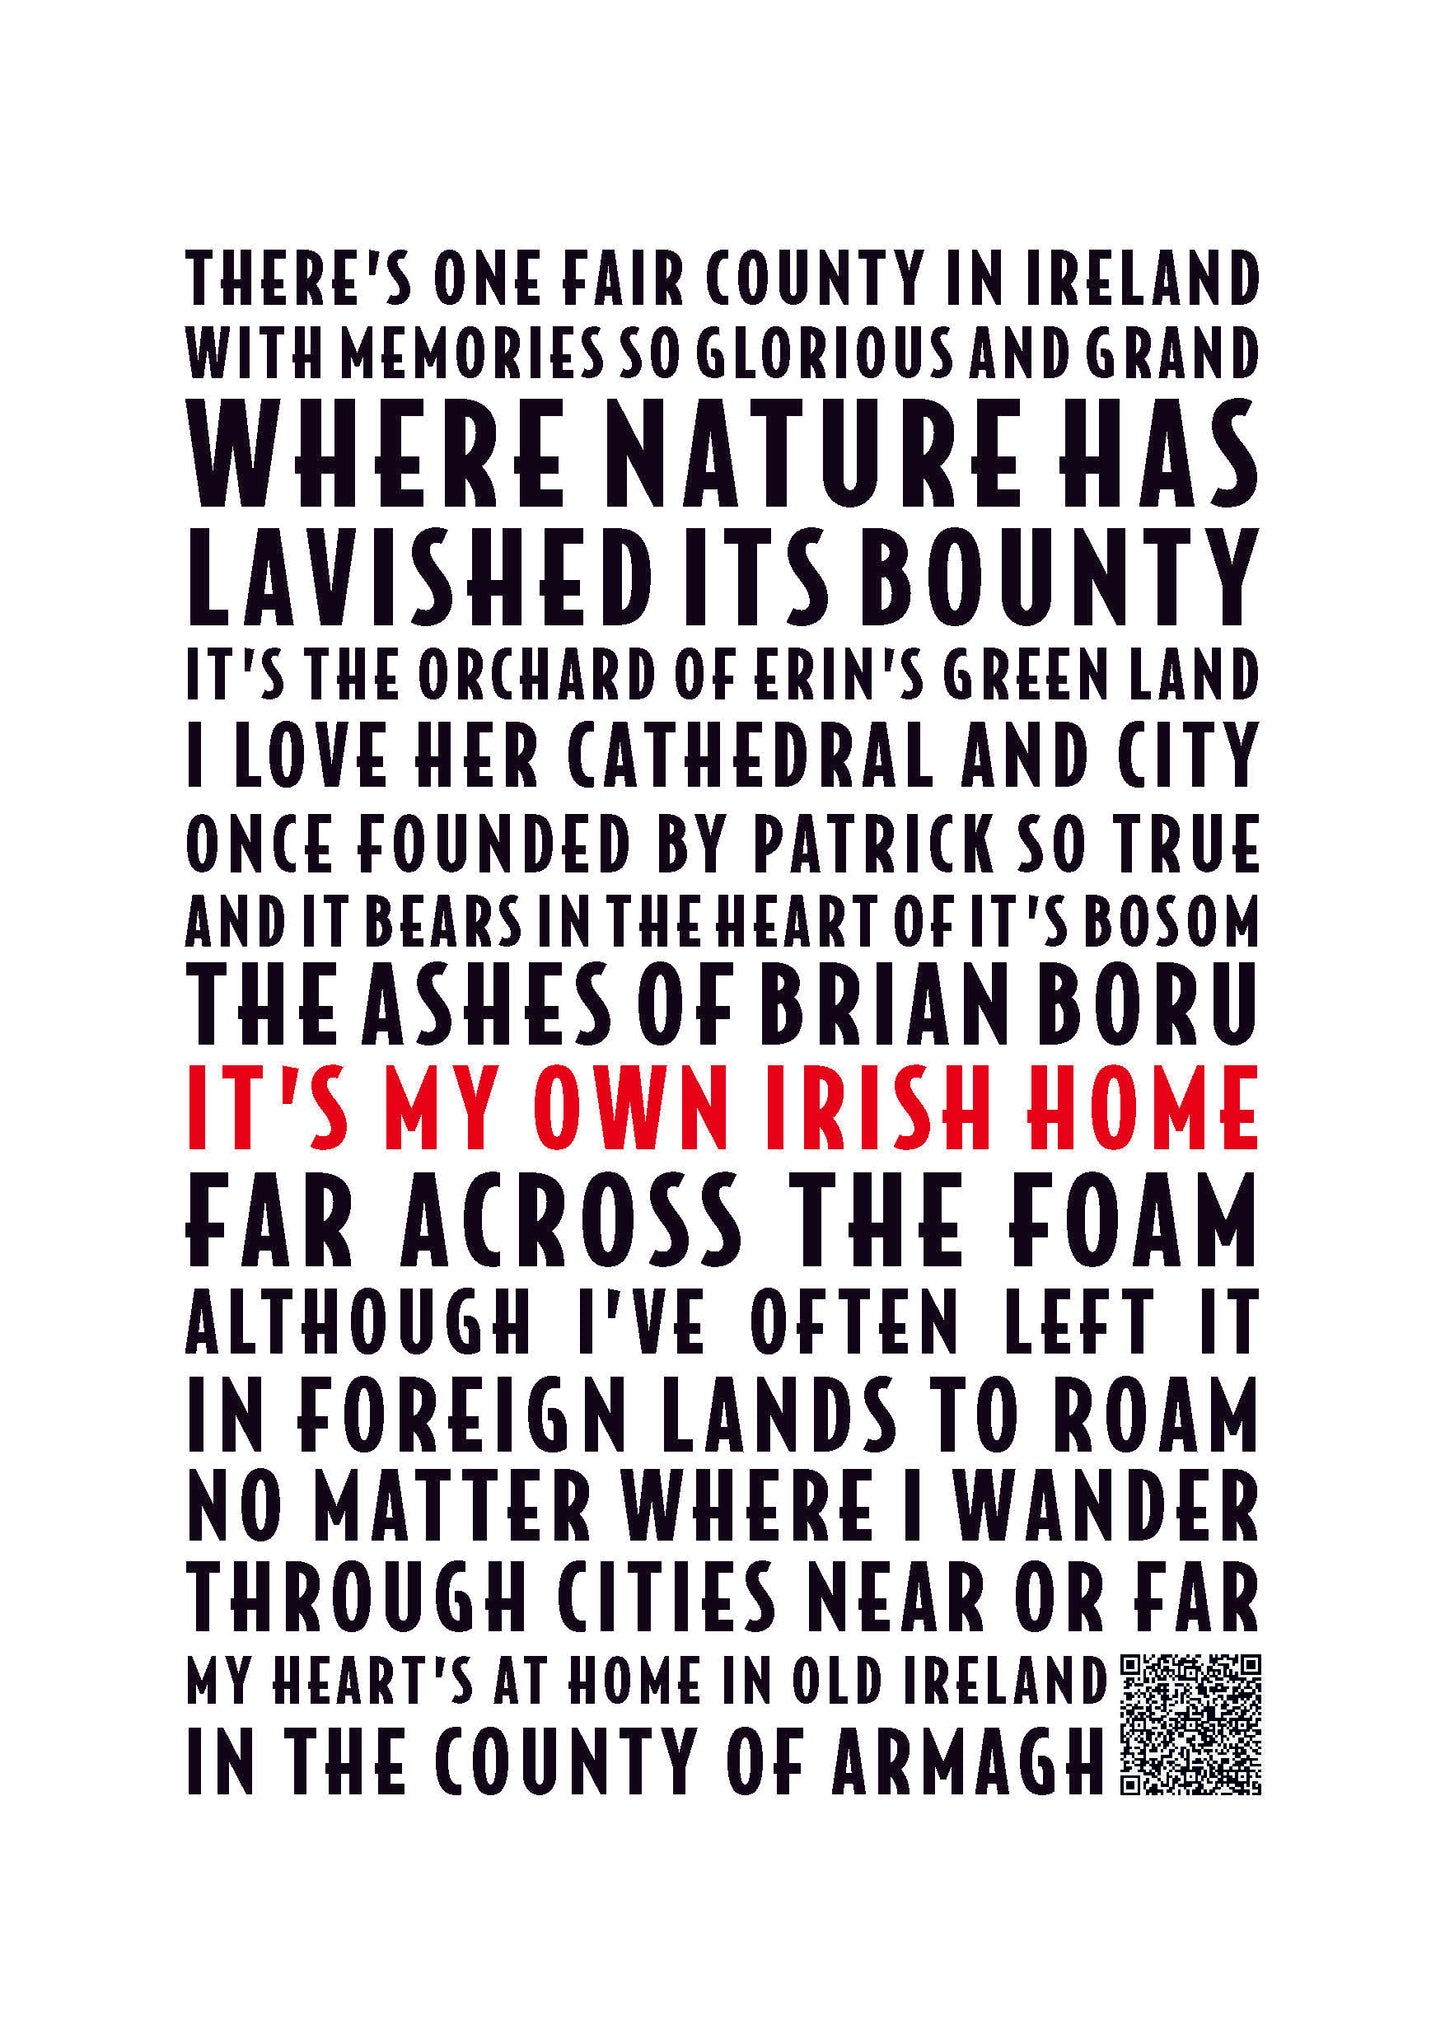 Boys From The County Armagh Print | The Wild Rover Song Poster | A4/A3/A2/A1